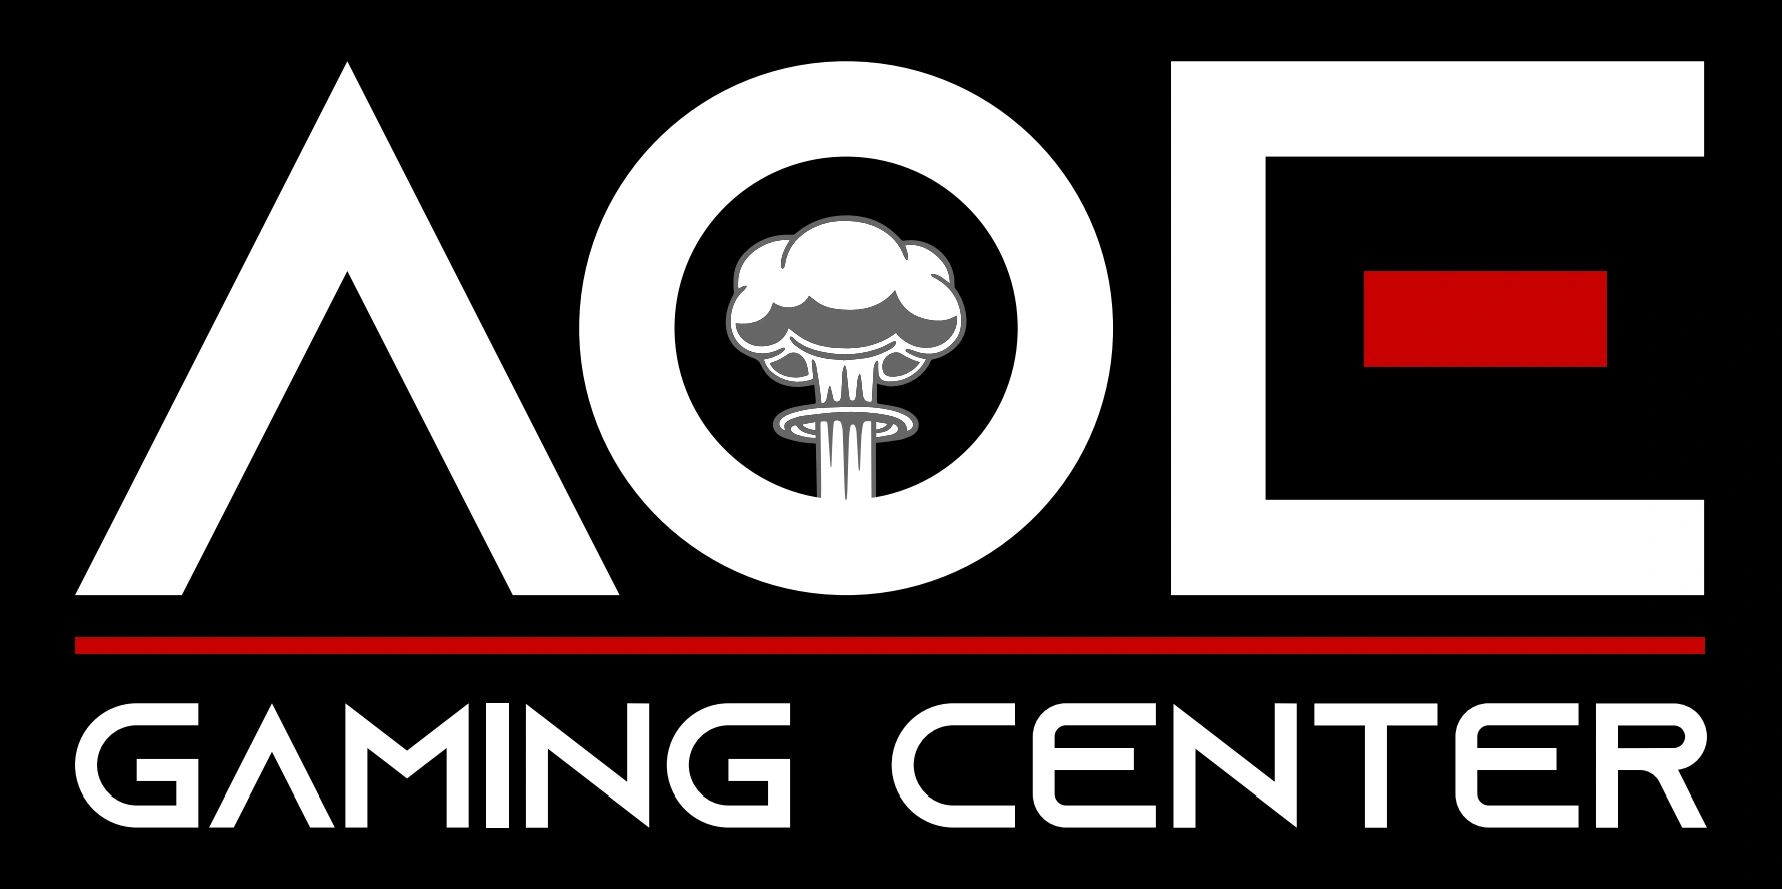 AoE Gaming Center In Greenville SC.  PC Gaming and Weekly Events.  